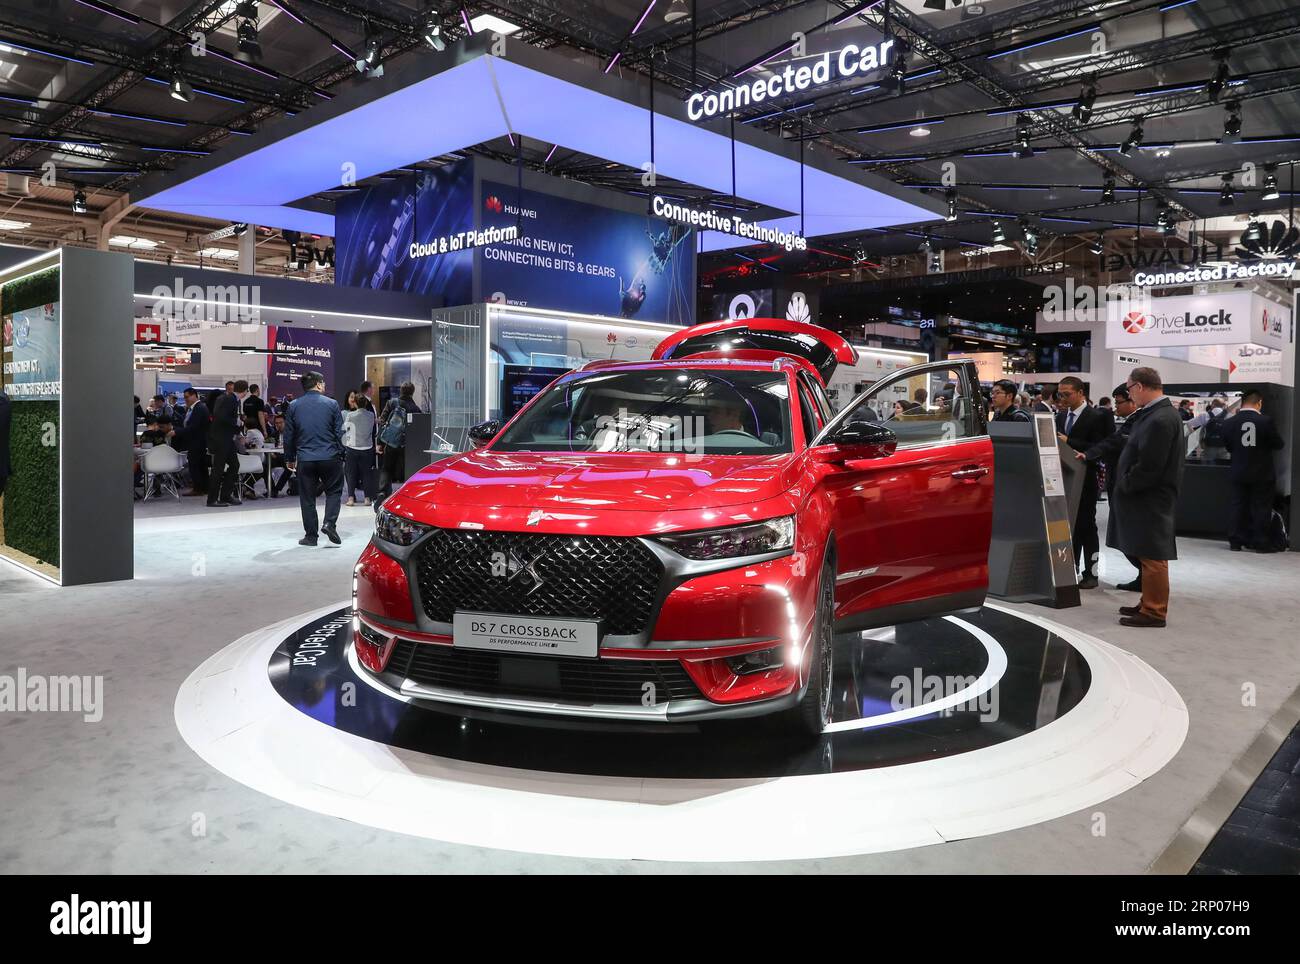 (180424) -- HANOVER (GERMANY), April 24, 2018 -- A DS 7 Crossback vehicle of Groupe PSA, using Connected Vehicle Modula Platform and equipped with Huawei technology for new connected services, is on display at the booth of Huawei at Hanover Fair 2018 in Hanover, Germany. Around 1,300 Chinese exhibitors participate in Hanover Fair this year. ) GERMANY-HANOVER-HANOVER FAIR 2018-CHINESE EXHIBITORS ShanxYuqi PUBLICATIONxNOTxINxCHN Stock Photo